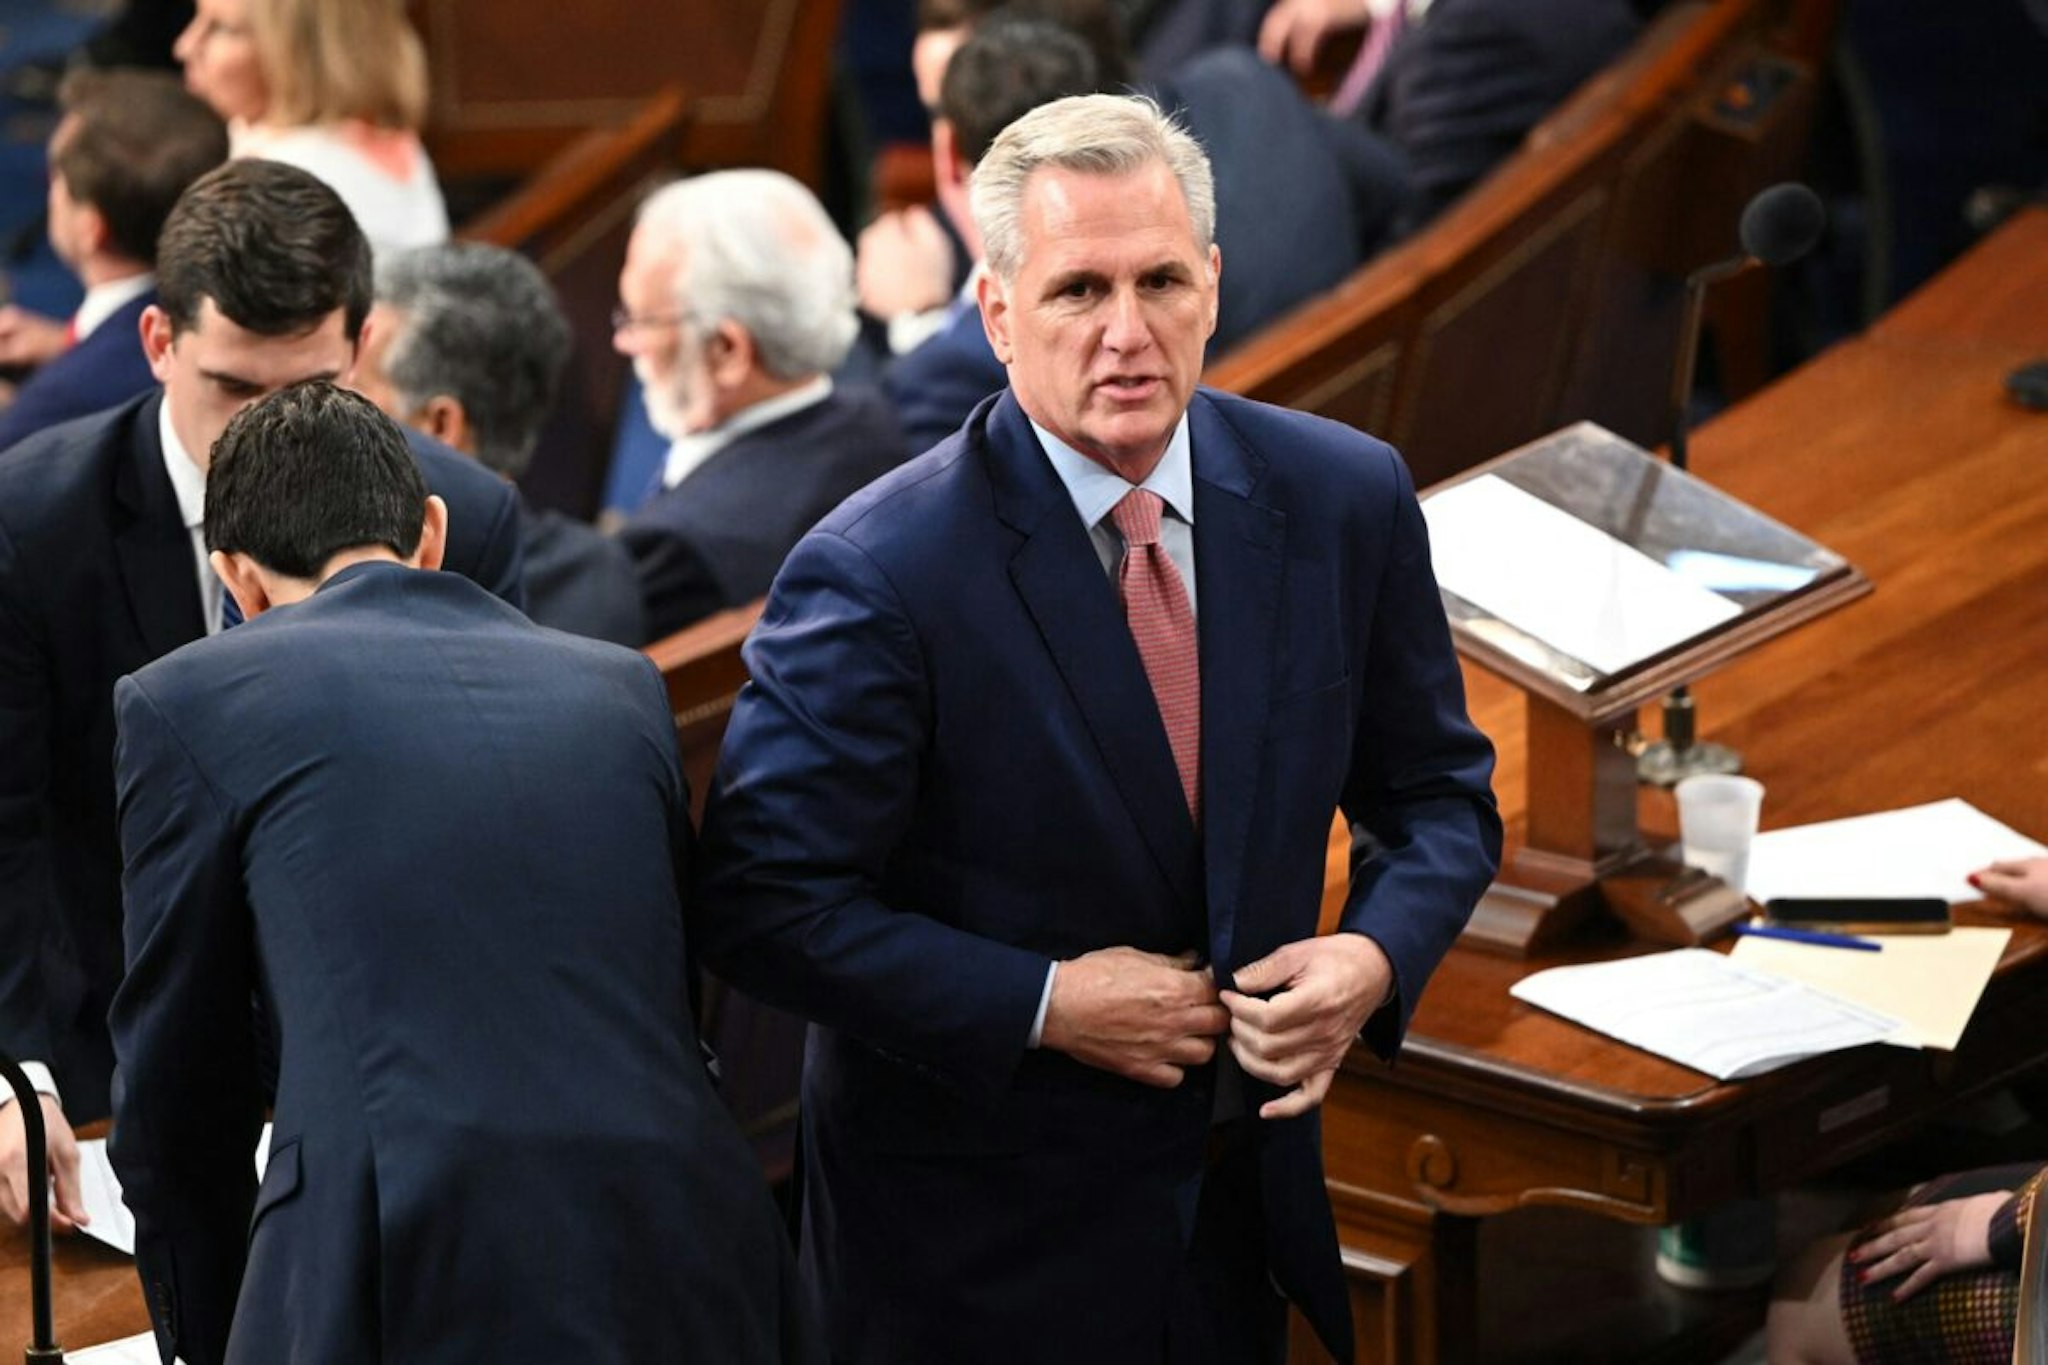 US Republican Representative Kevin McCarthy (R) of California listens as the US House of Representatives convenes for the 118th Congress at the US Capitol in Washington, DC, January 3, 2023.